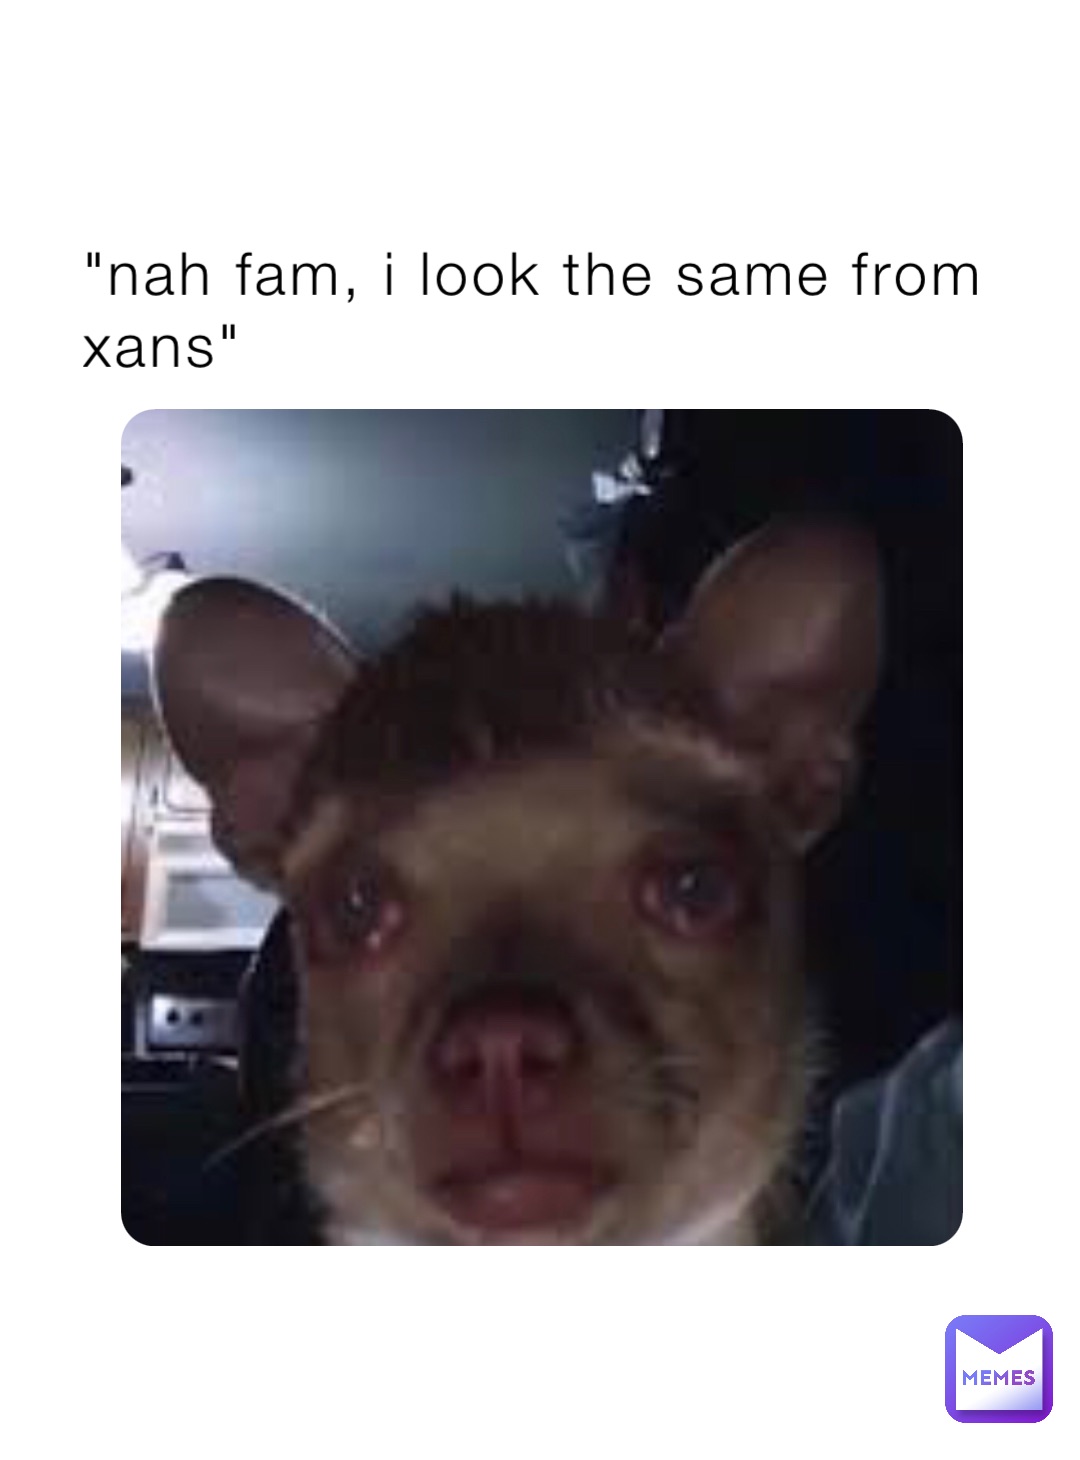 "nah fam, i look the same from xans"